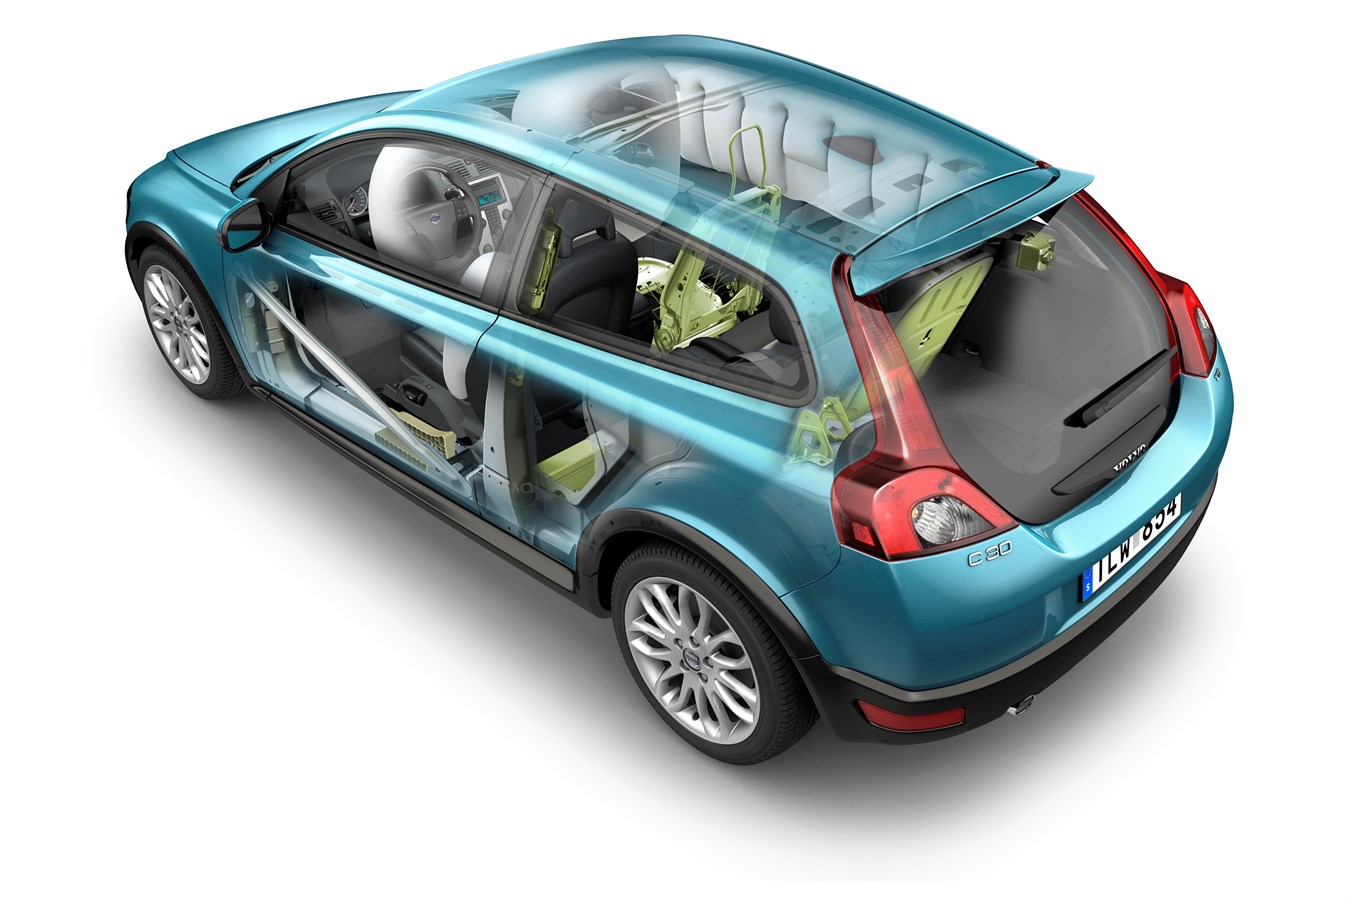 Volvo C30, Safety X-ray, Protective Safety, Integrated safety systems.